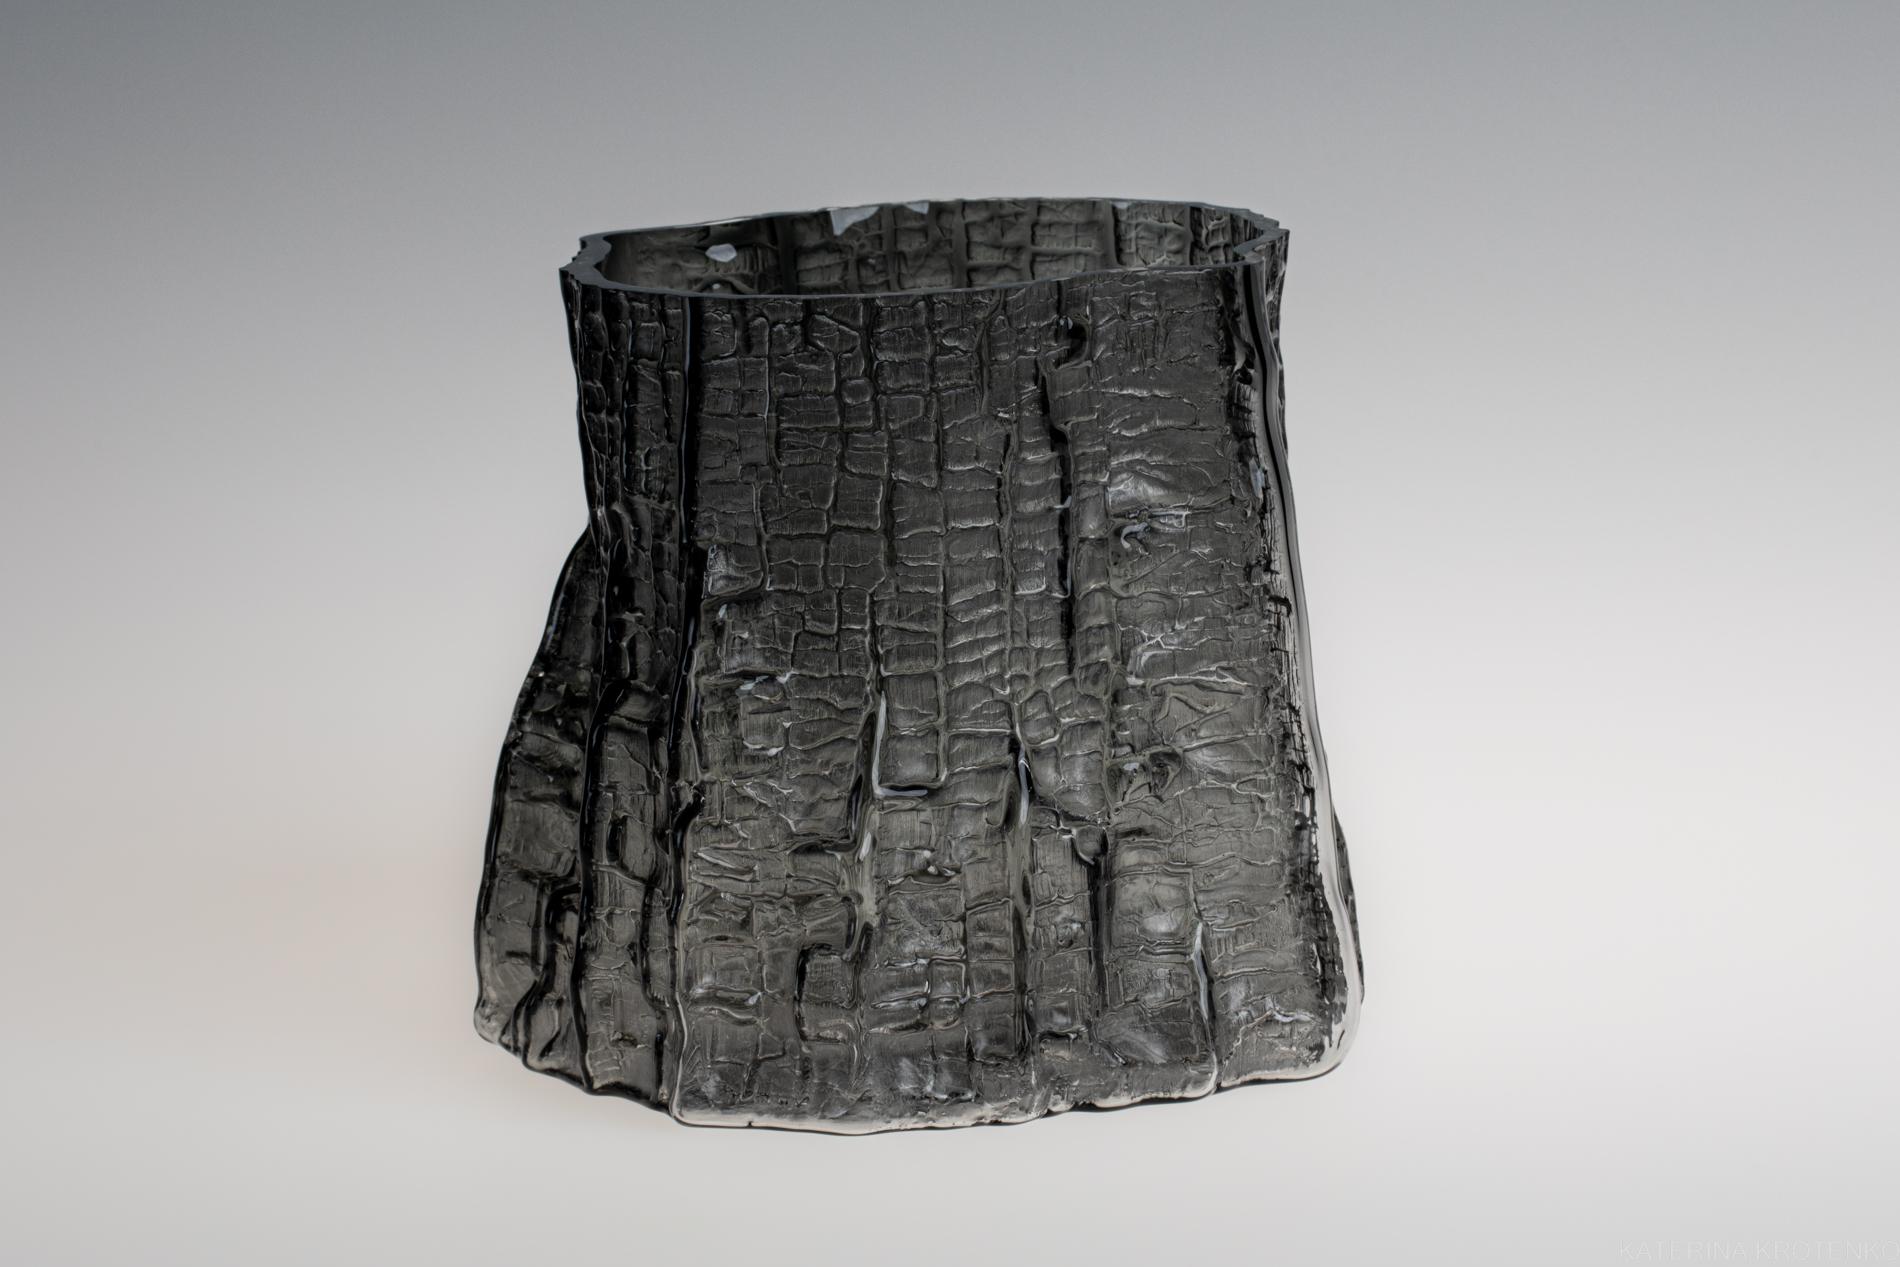 sculptural glass vase, volume IV, smoky dark gray
approximate dimensions: 15–18 cm

Shaped by fire collection of glass vessels represents movement in time, the simultaneity of the past and the future. The making process is a captivating synergy of